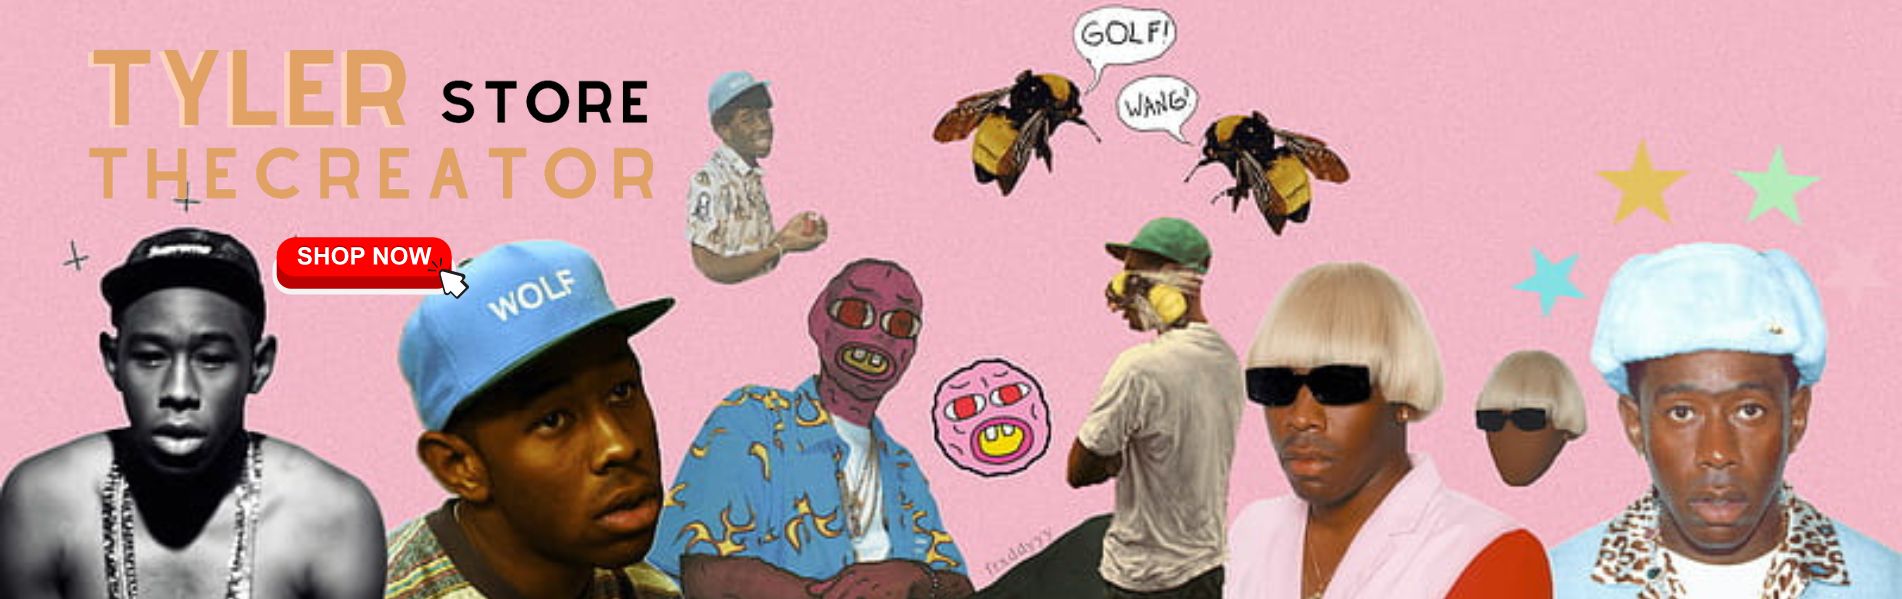 Tyler The Creator Store Banner - Tyler The Creator Official Store